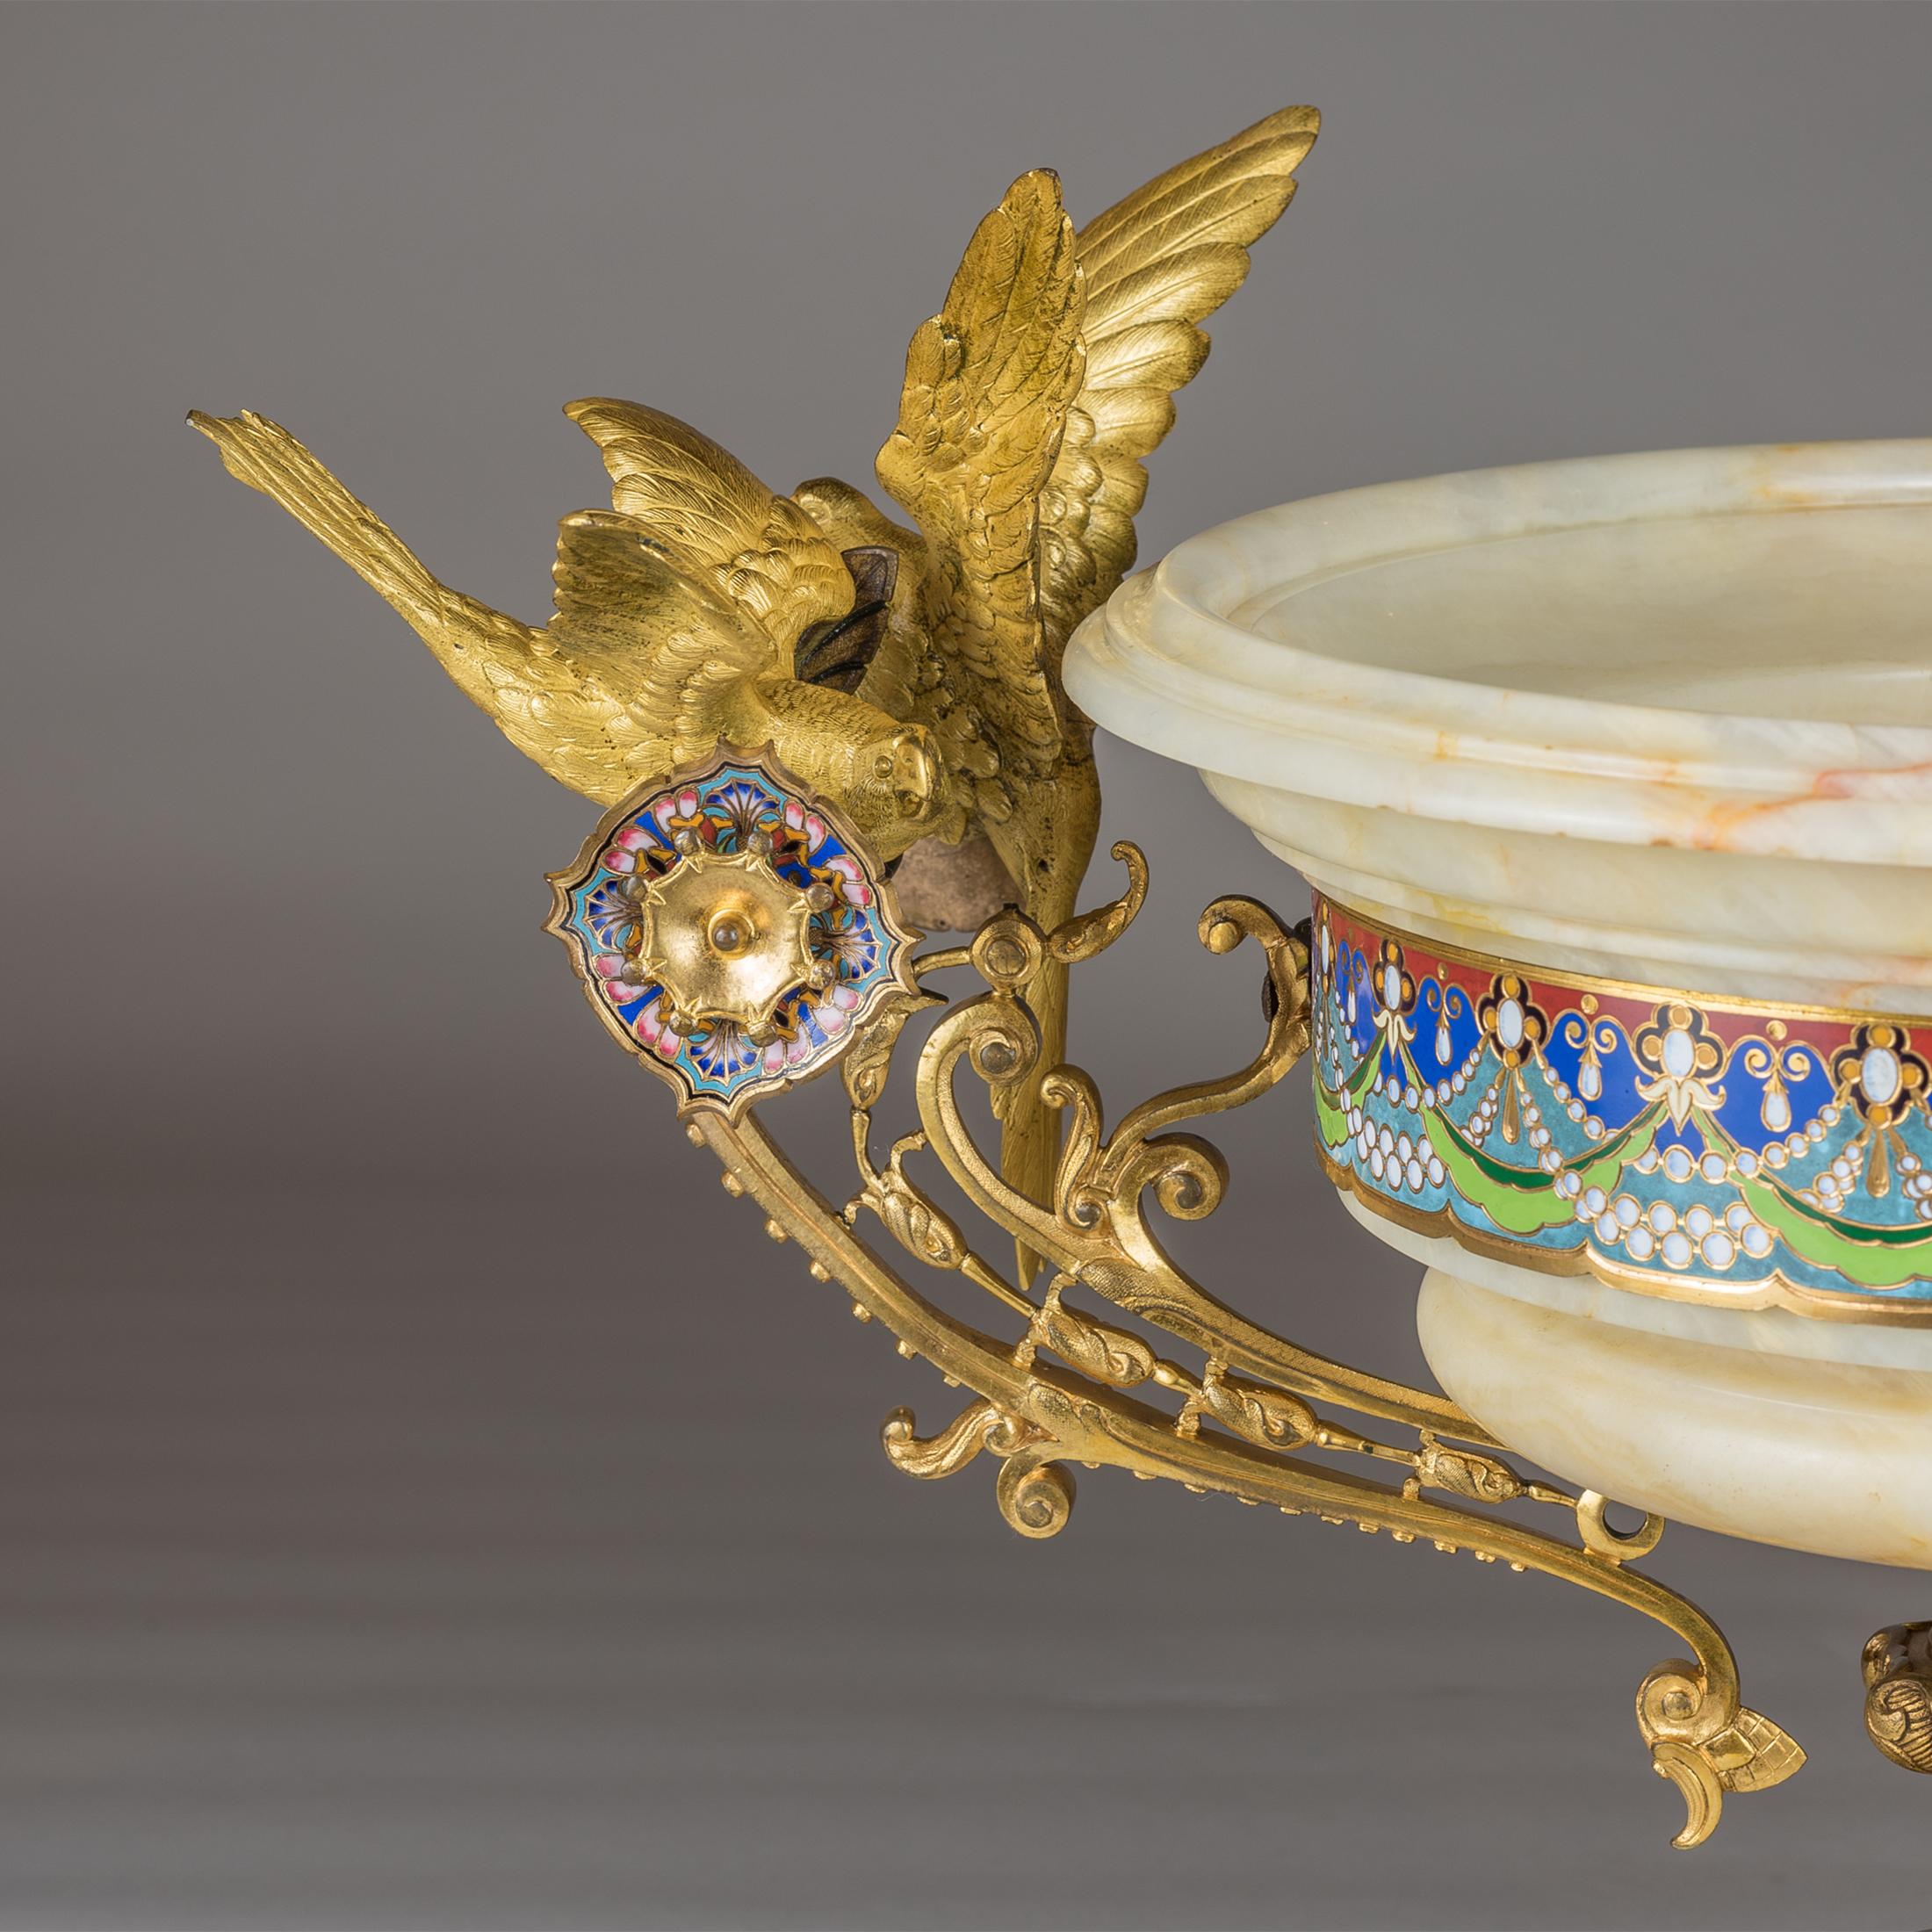 19th Century Large Gilt-Bronze Mounted Champlevé Enamel and Onyx Centrepiece 1